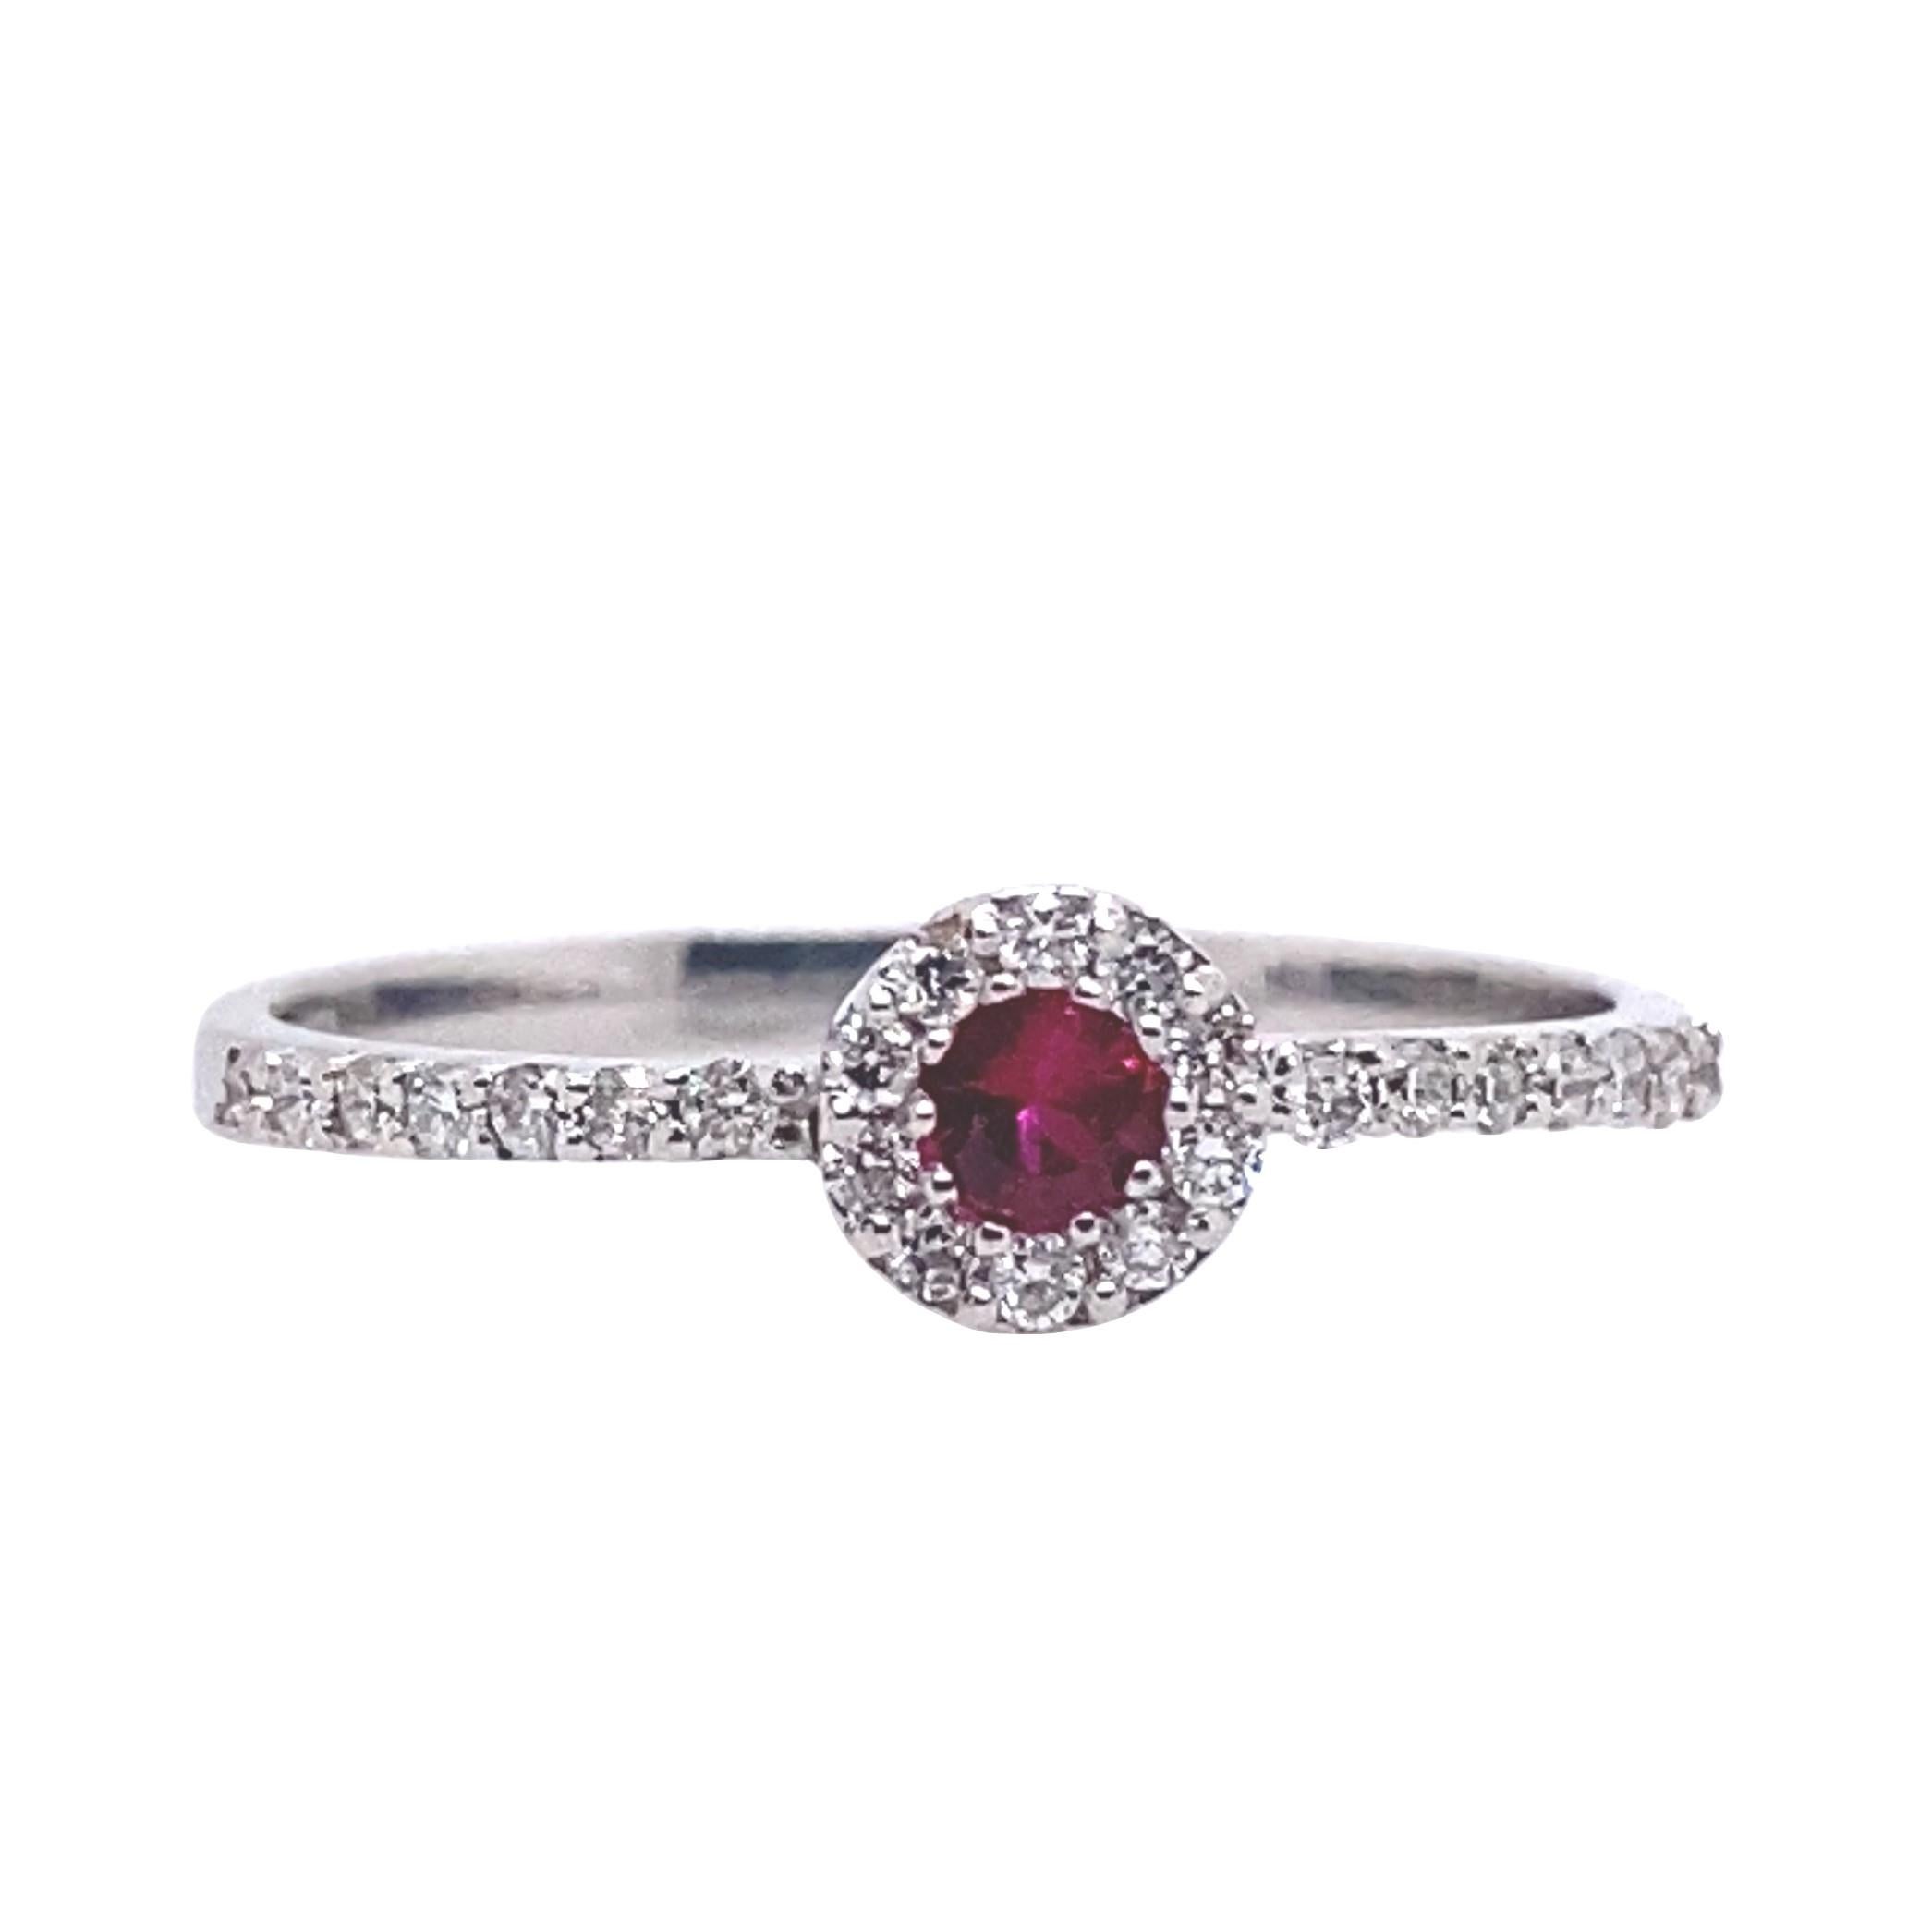 Every day is St. Valentine's Day!
This ring has been masterfully created entirely by hand from 18-karat white gold and contains 24 white G VS diamonds and a round-cut, spectacular ruby

The photographed ring is an EU 14/US 7 ring size. It can be